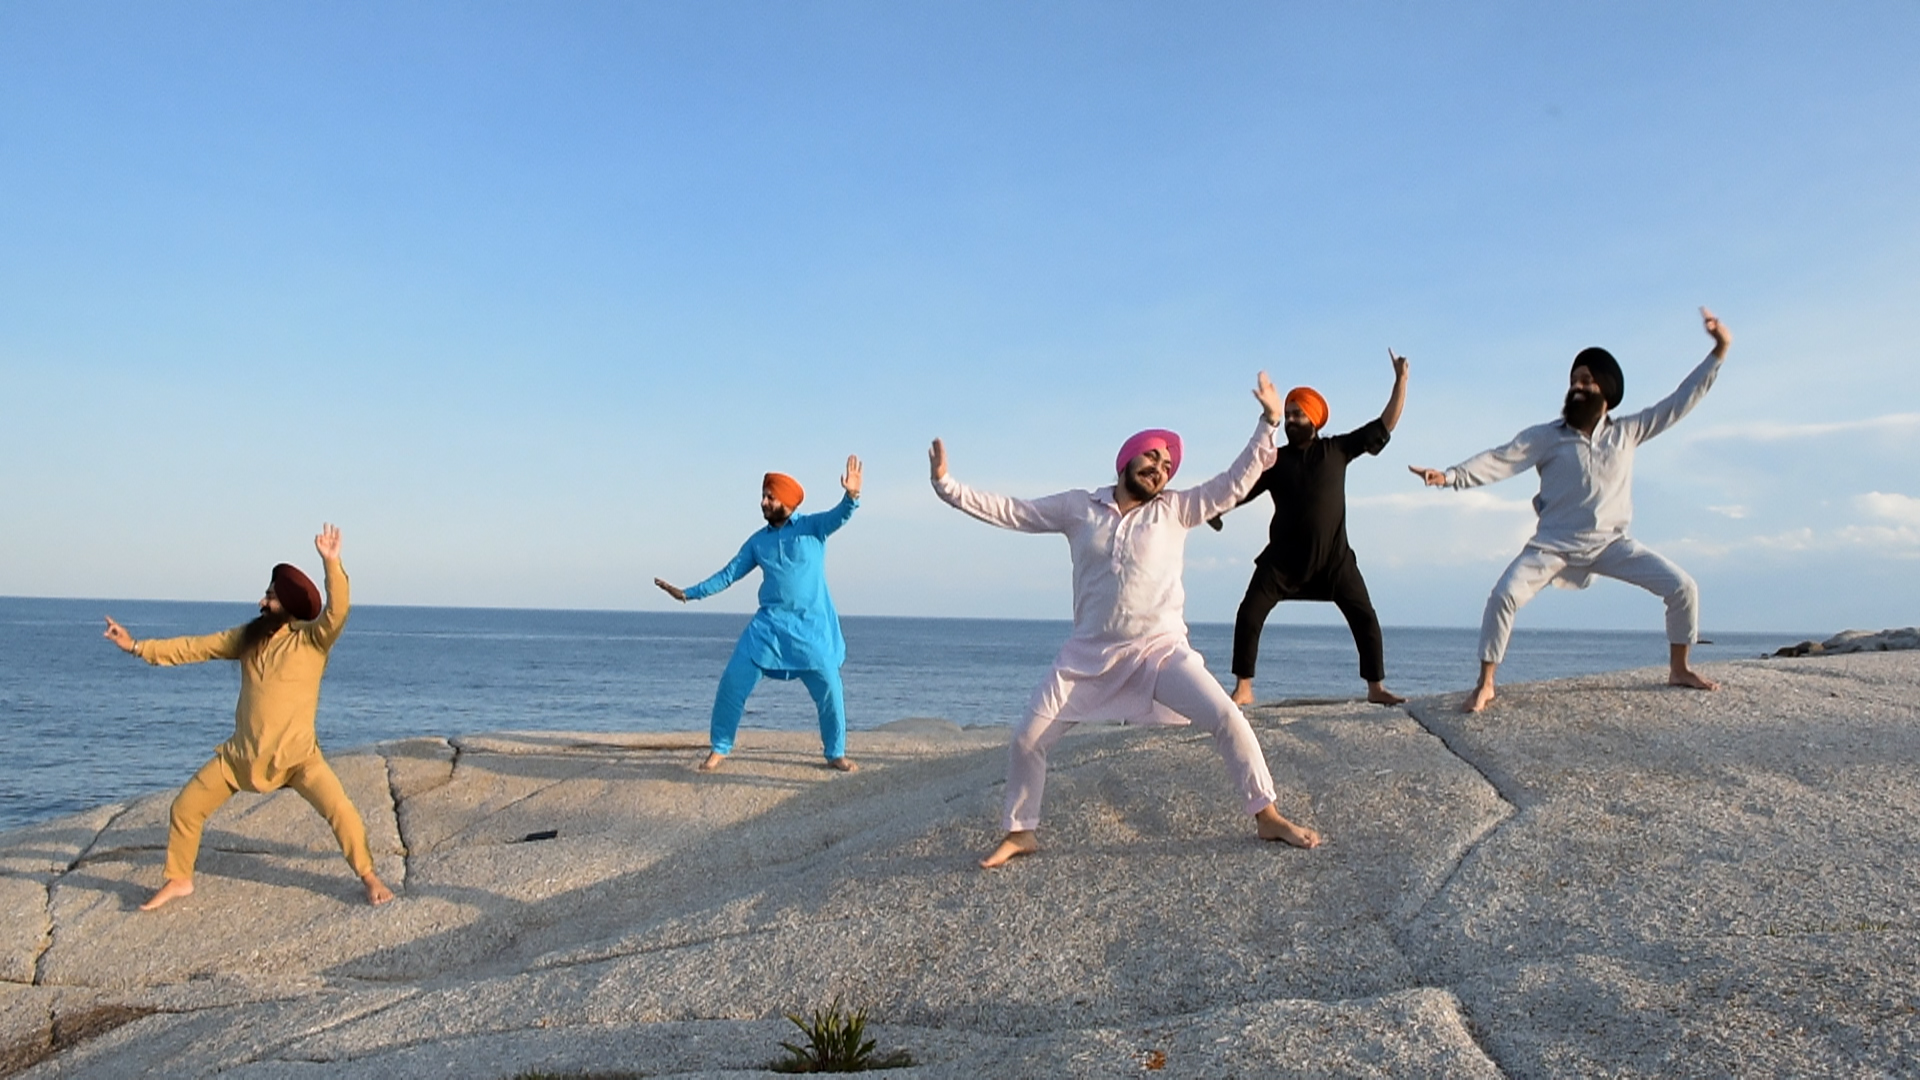 The 5 Bhangra Boys dancing on a ledge with the sea behind them